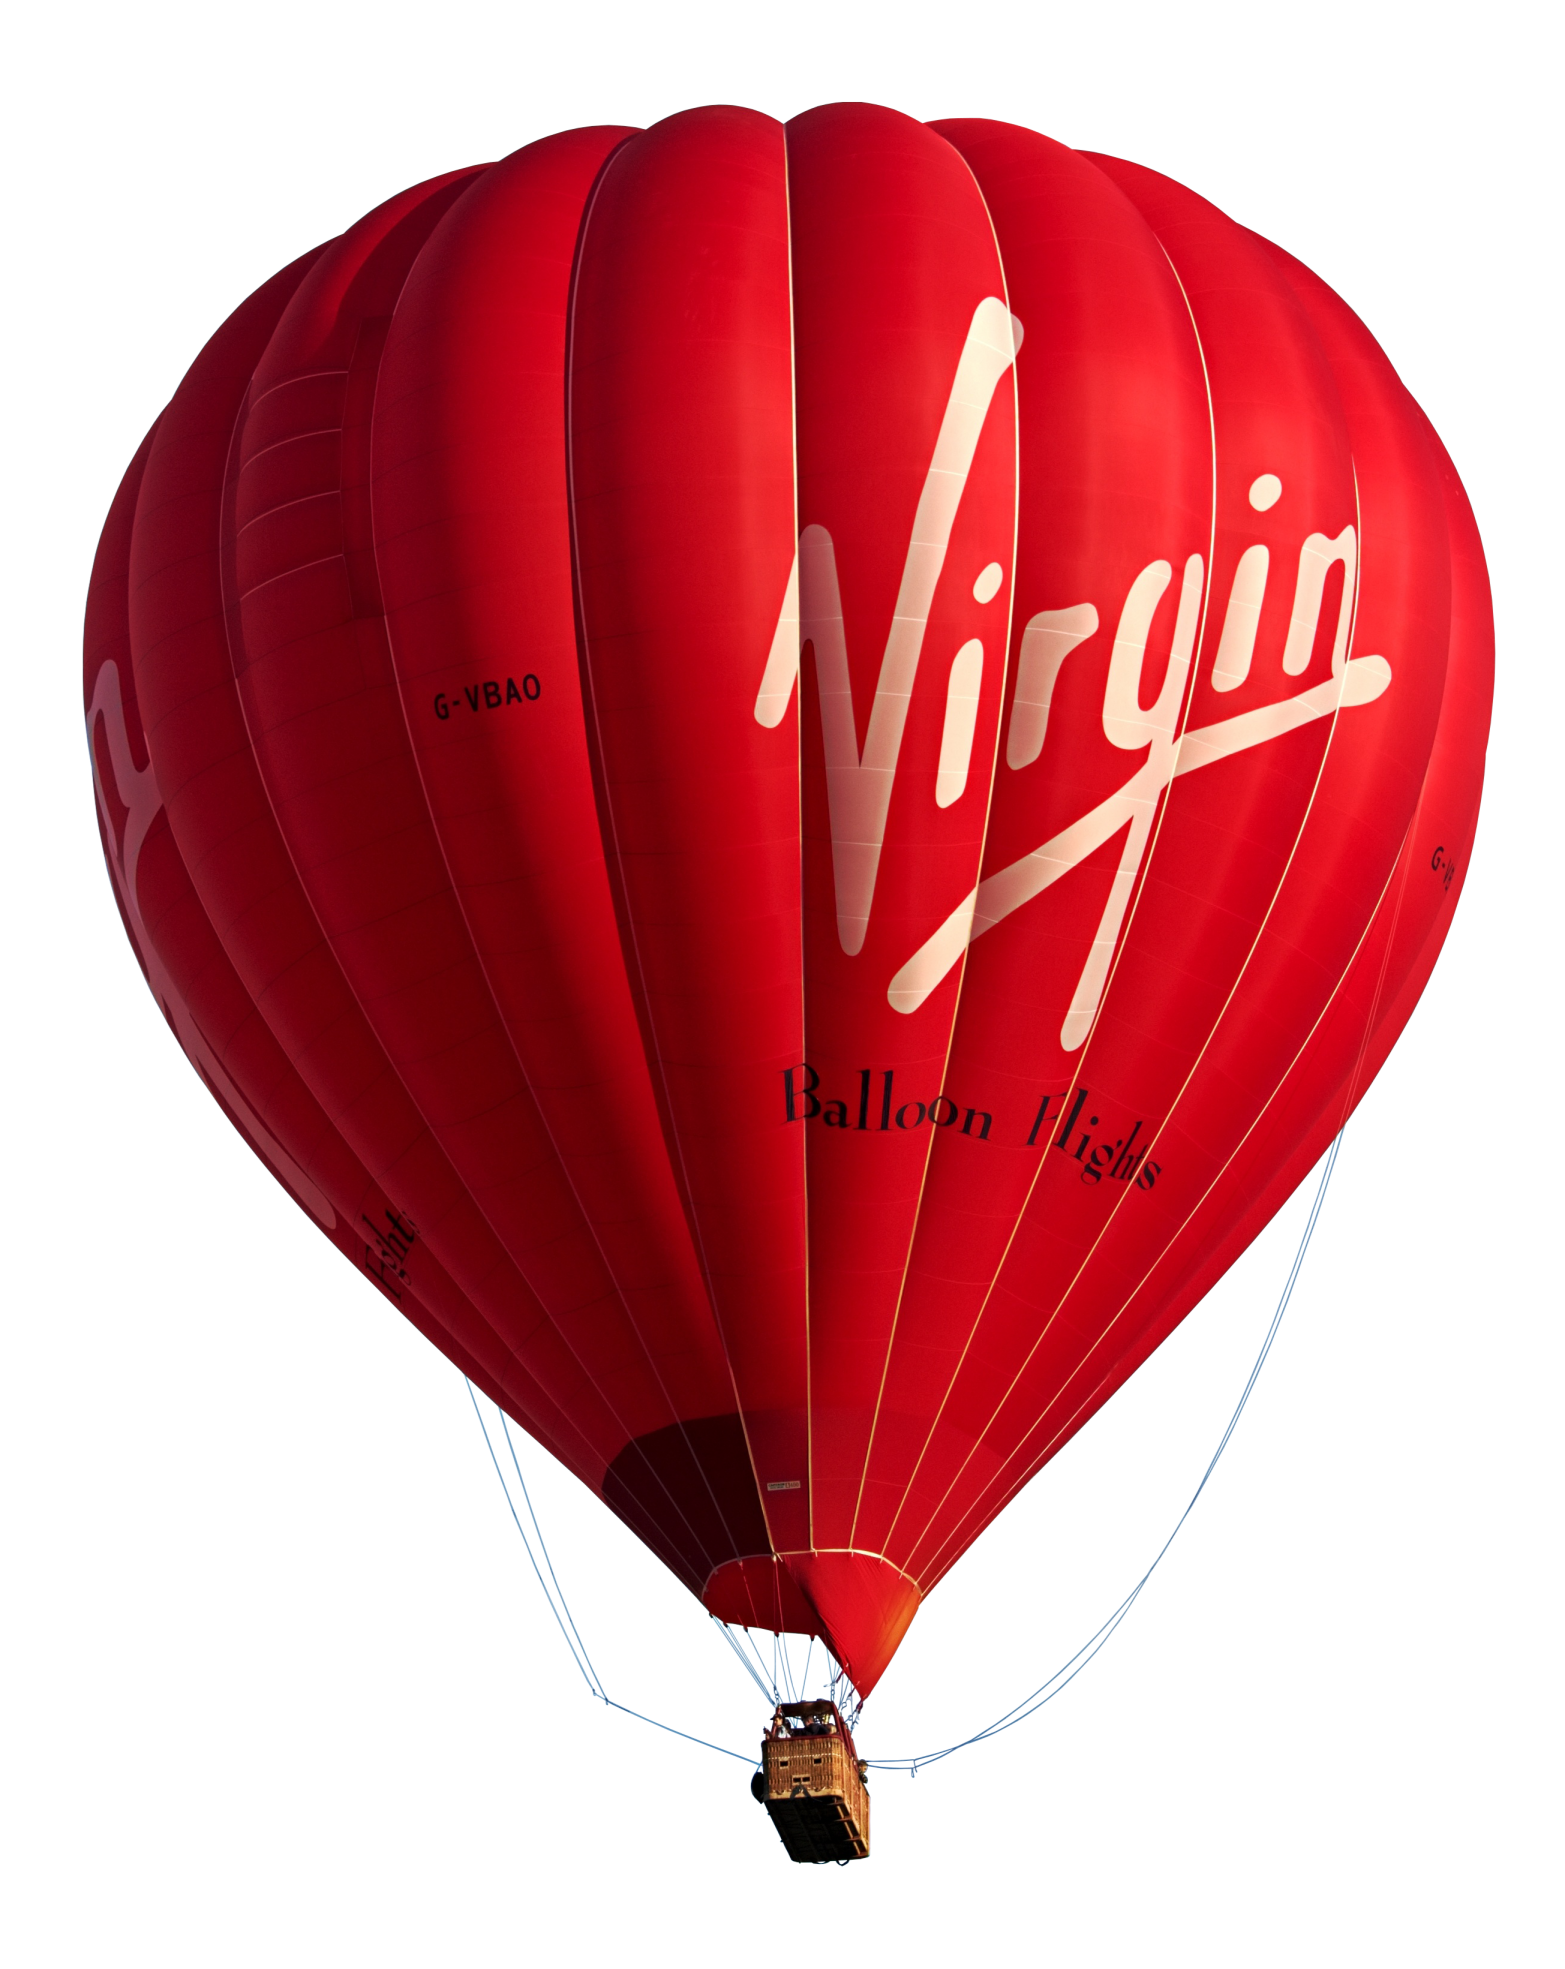 Red Hot Air Balloon PNG HD Quality